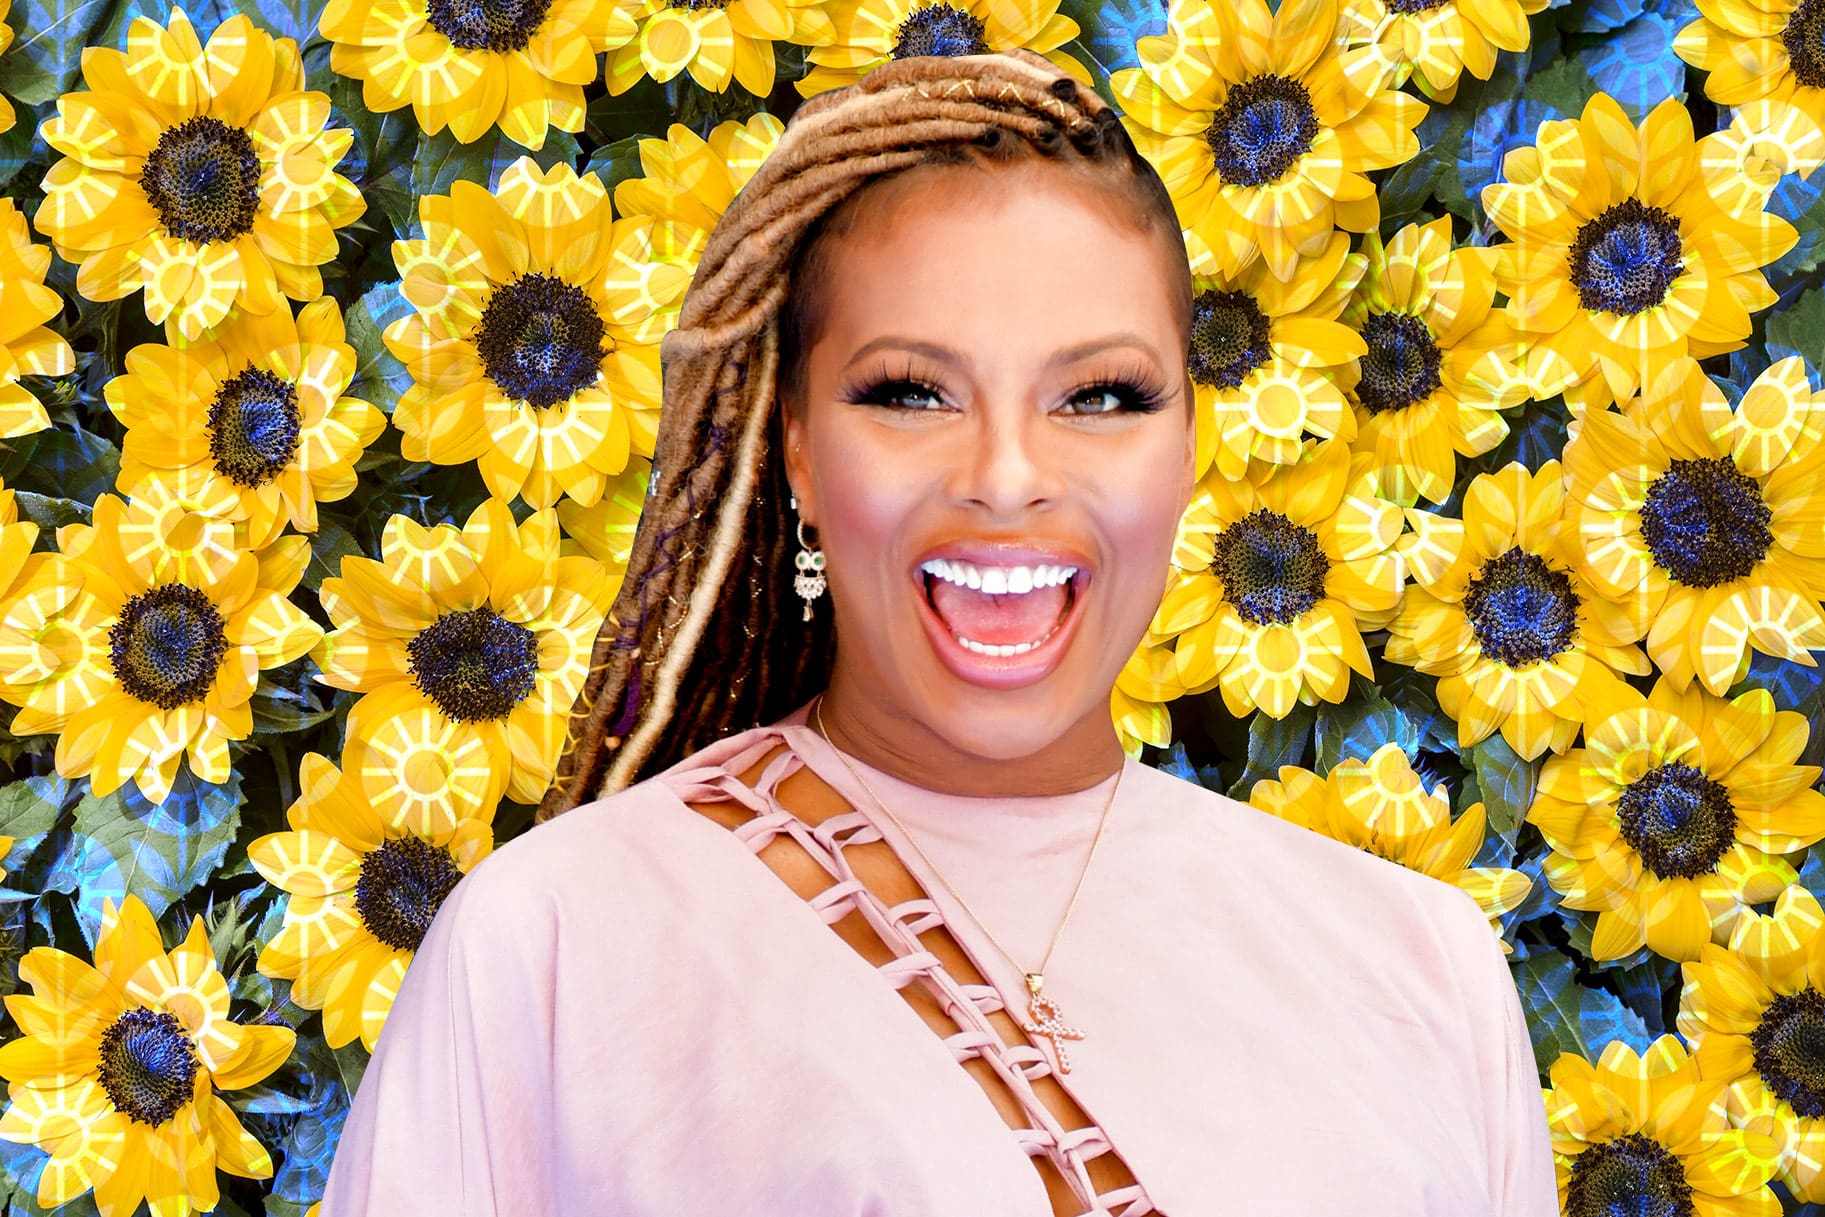 Eva Marcille Shares A Sweet Video Featuring Her Daughter Marley And